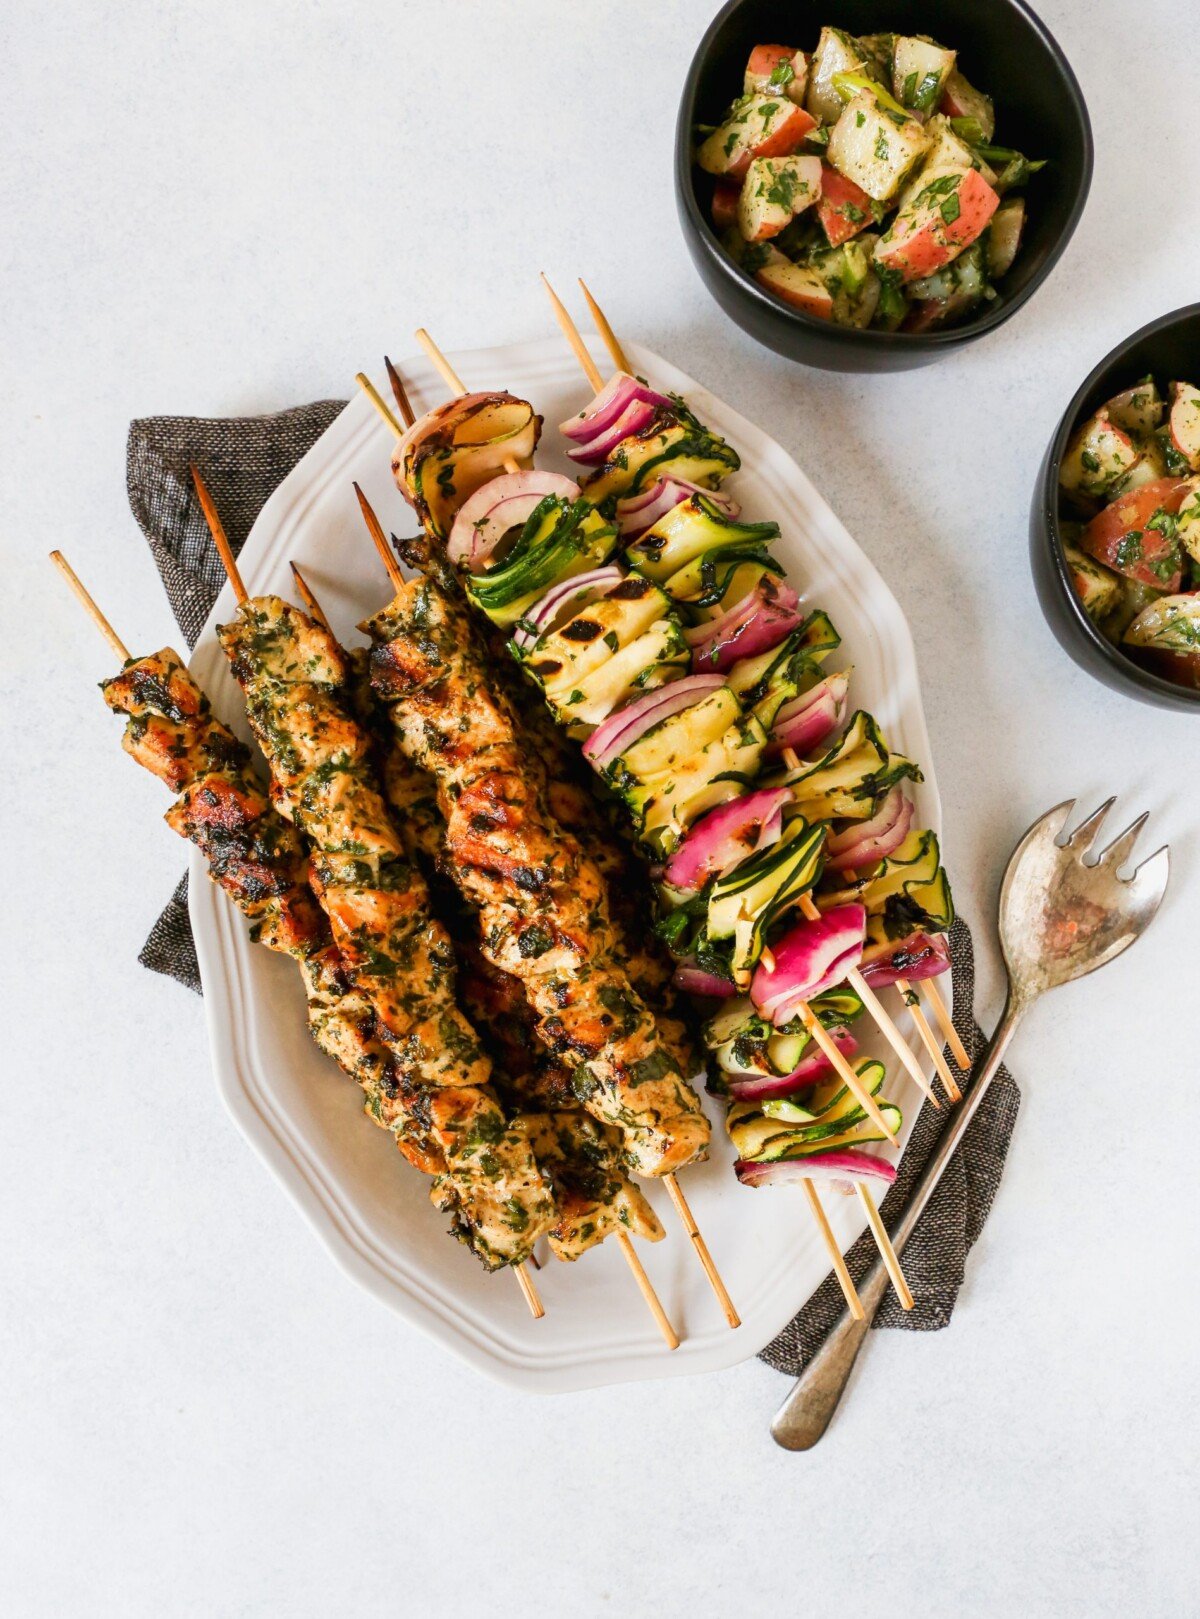 Chicken and vegetable skewers piled on a white platter with a green and white napkin.